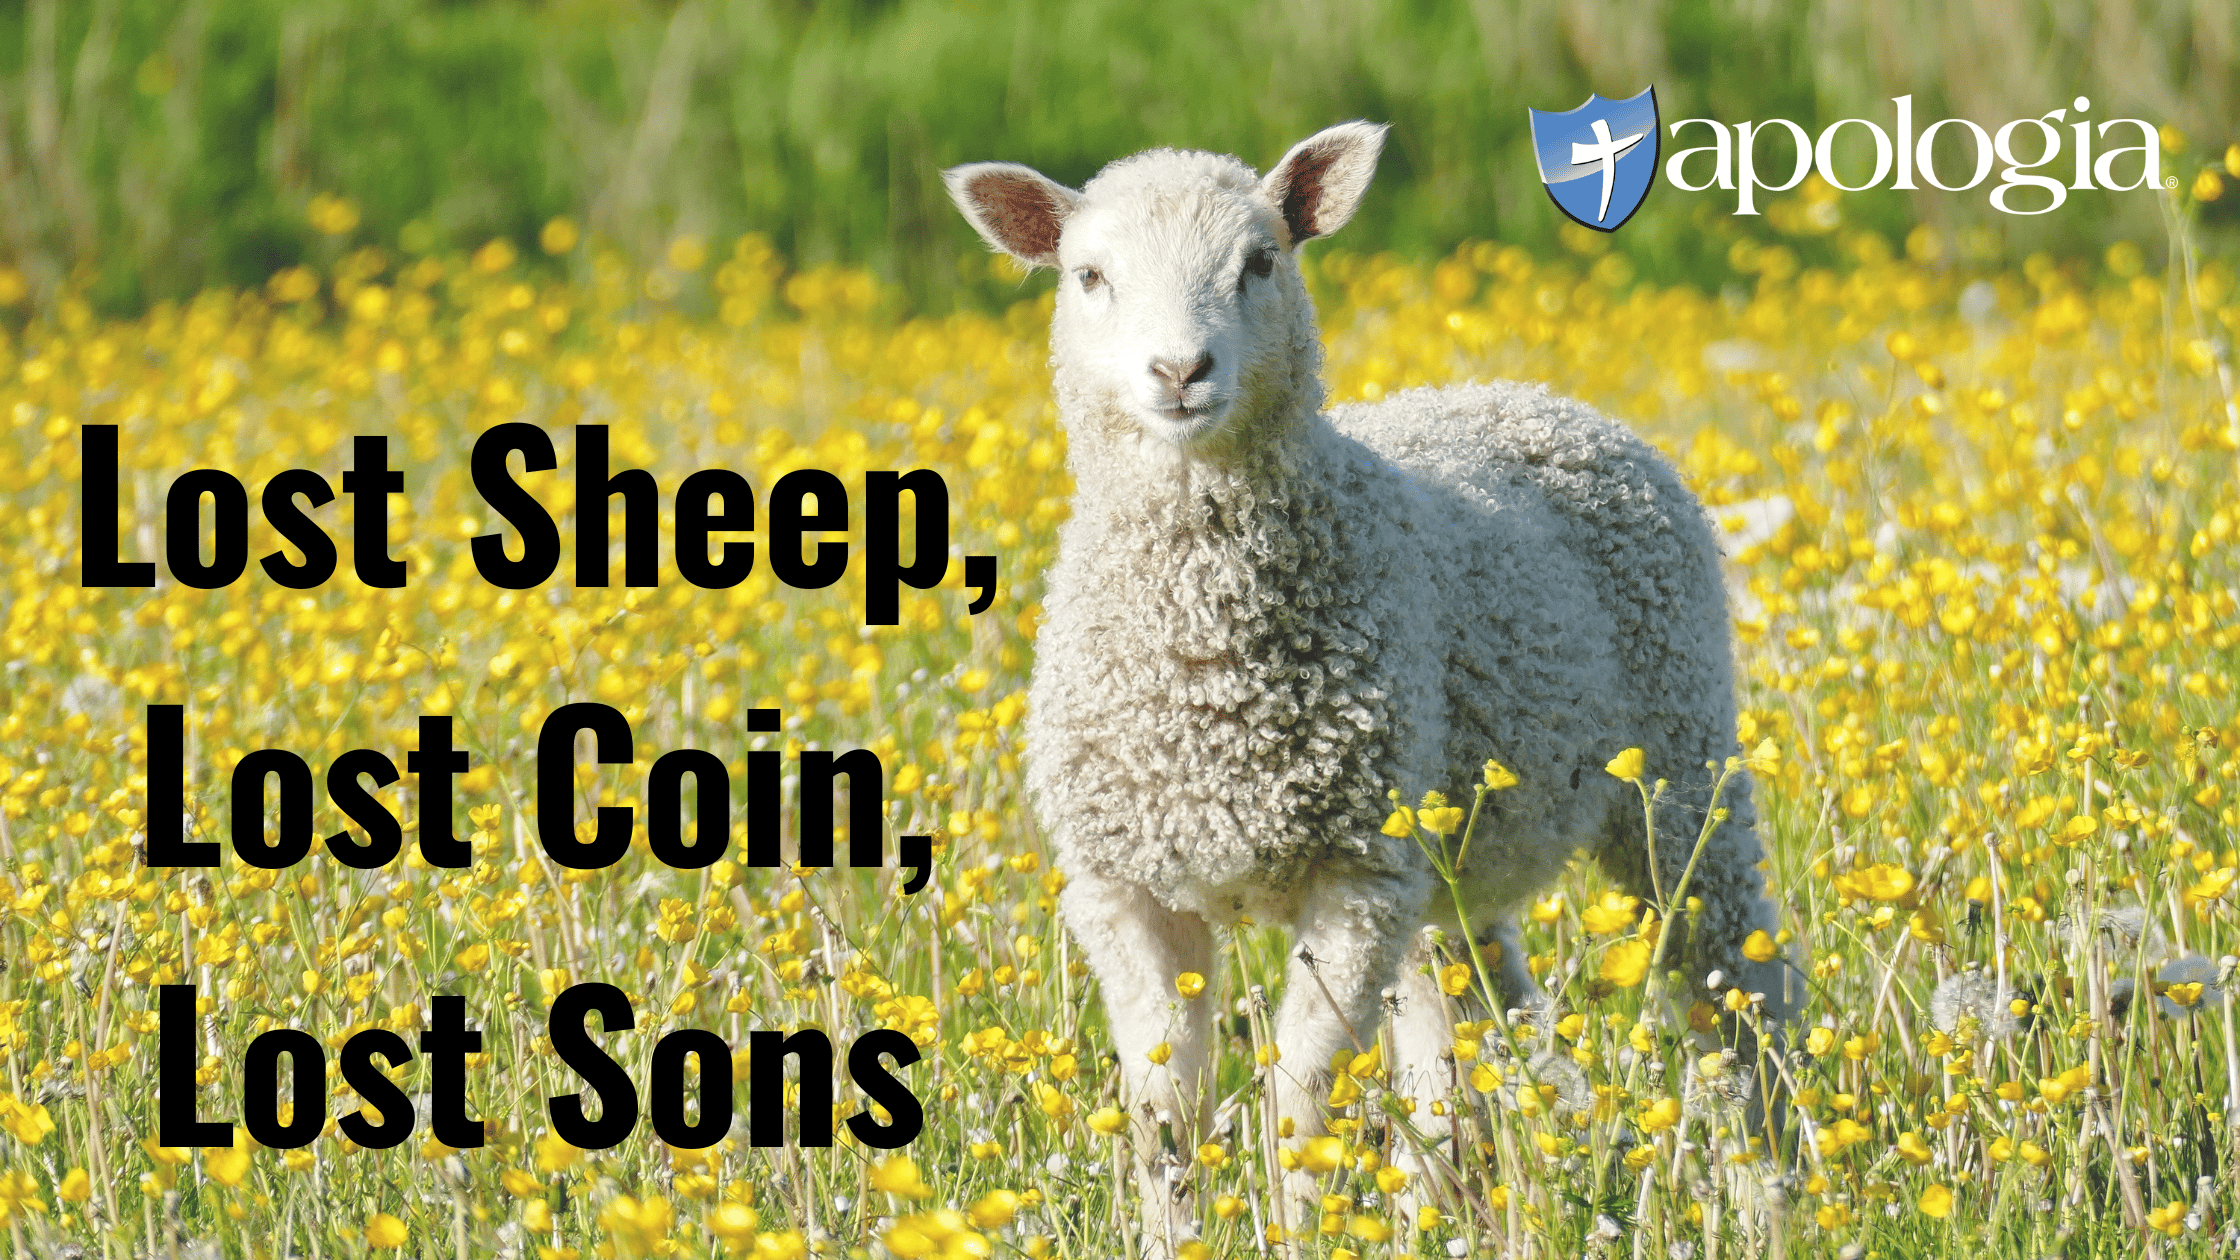 Lost Sheep, Lost Coin, Lost Sons